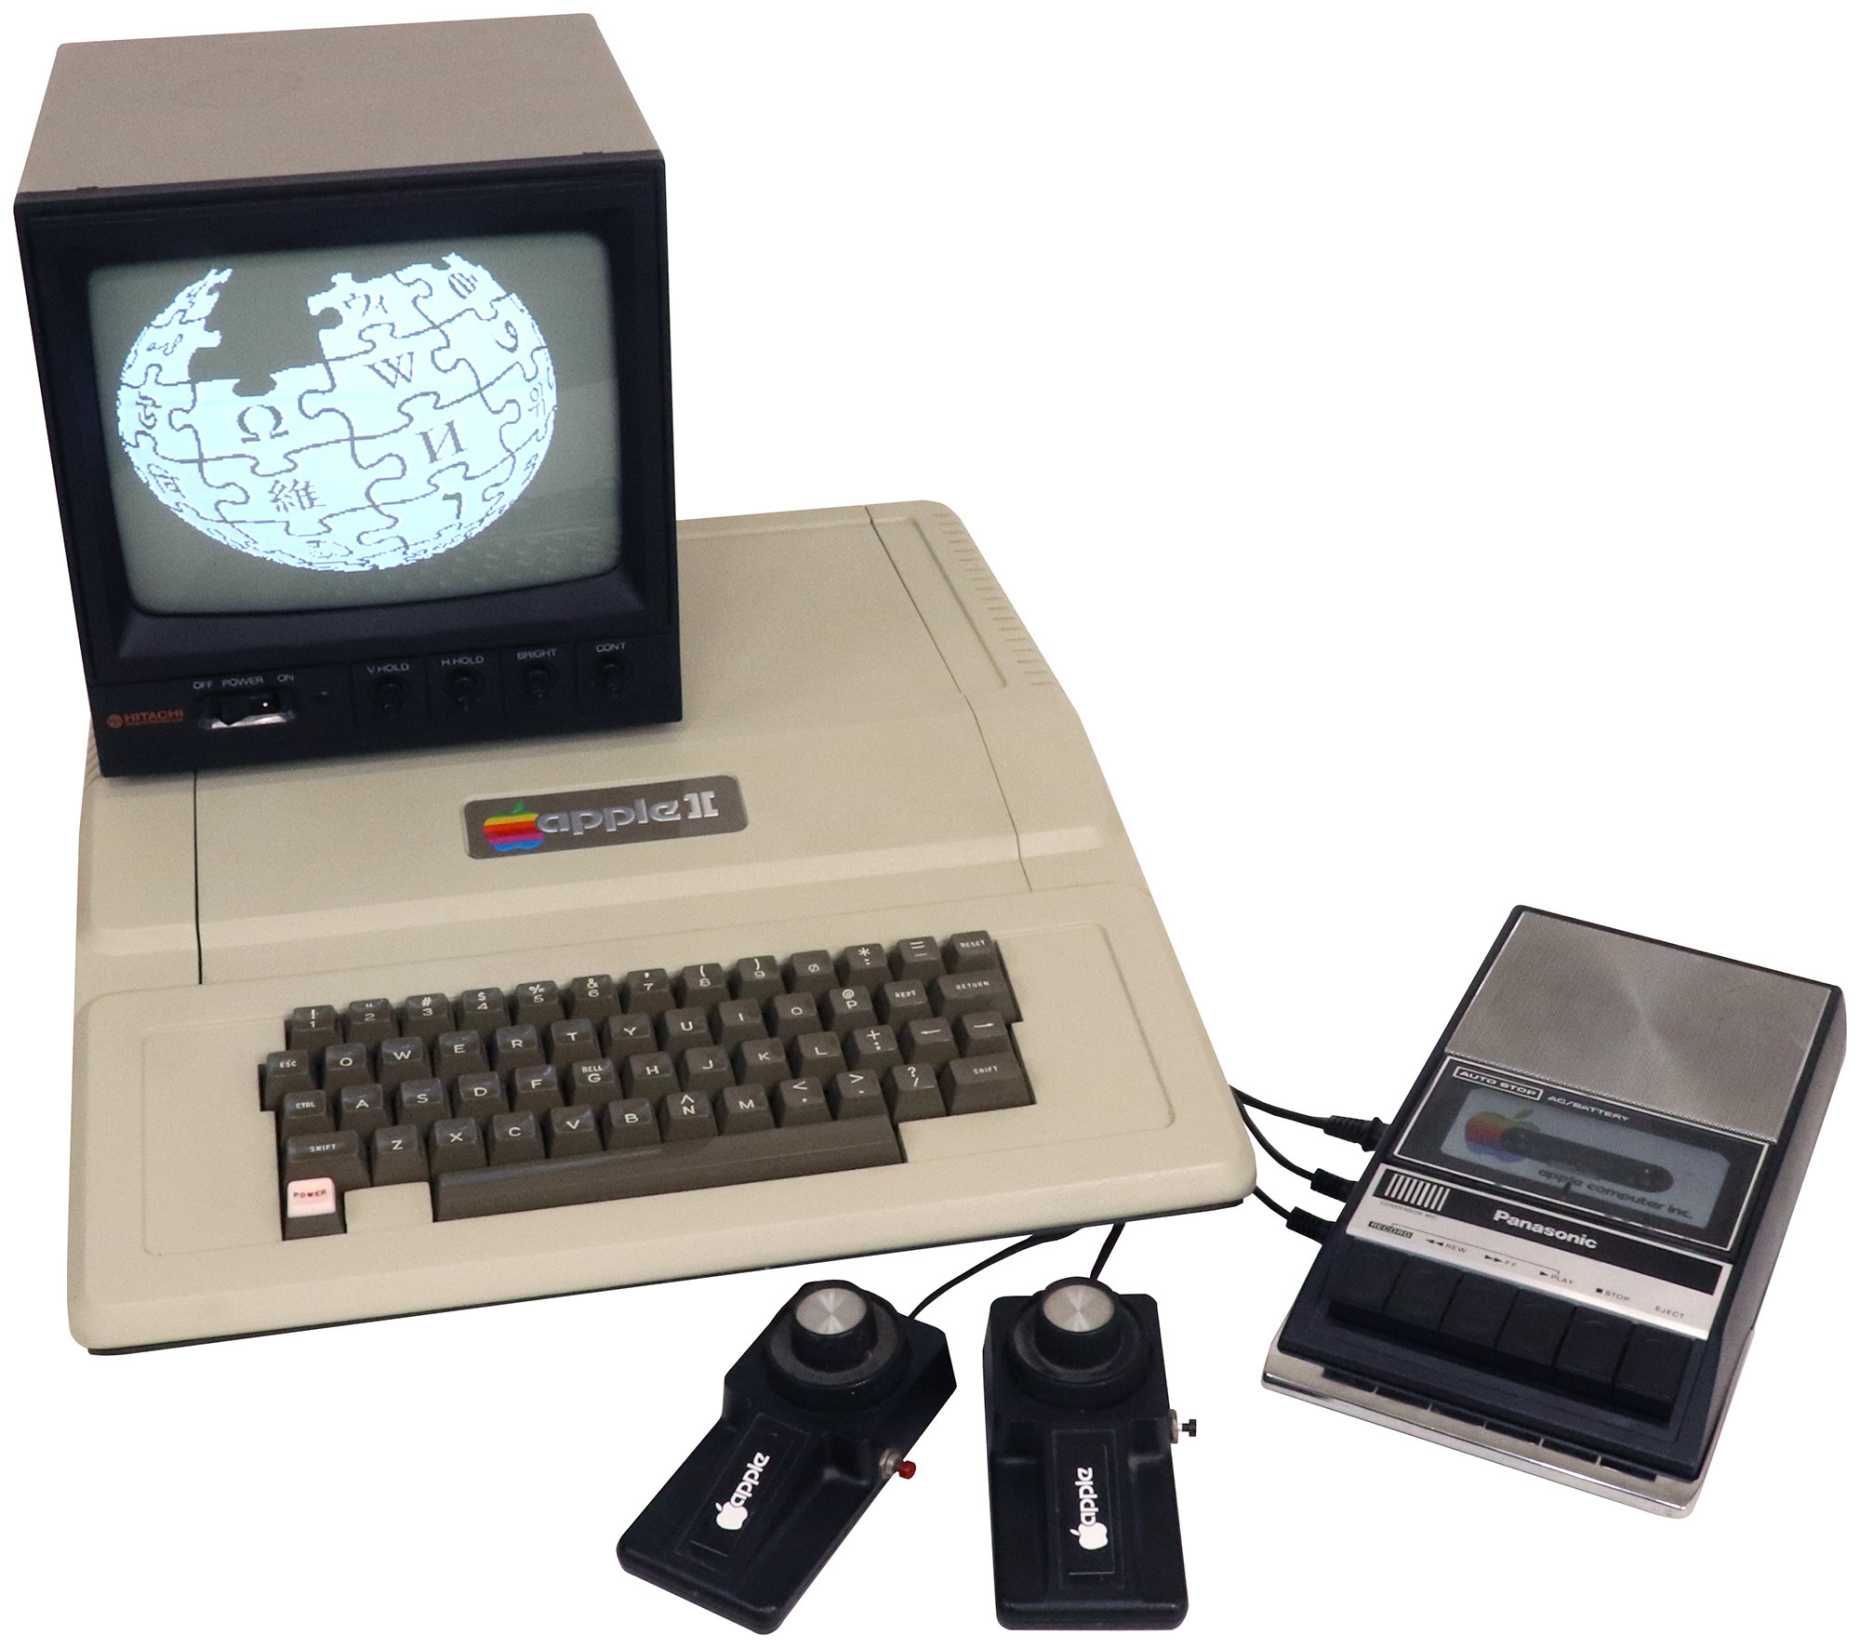 Apple II computer with peripherals. Photo: FozzTexx, Creative Commons